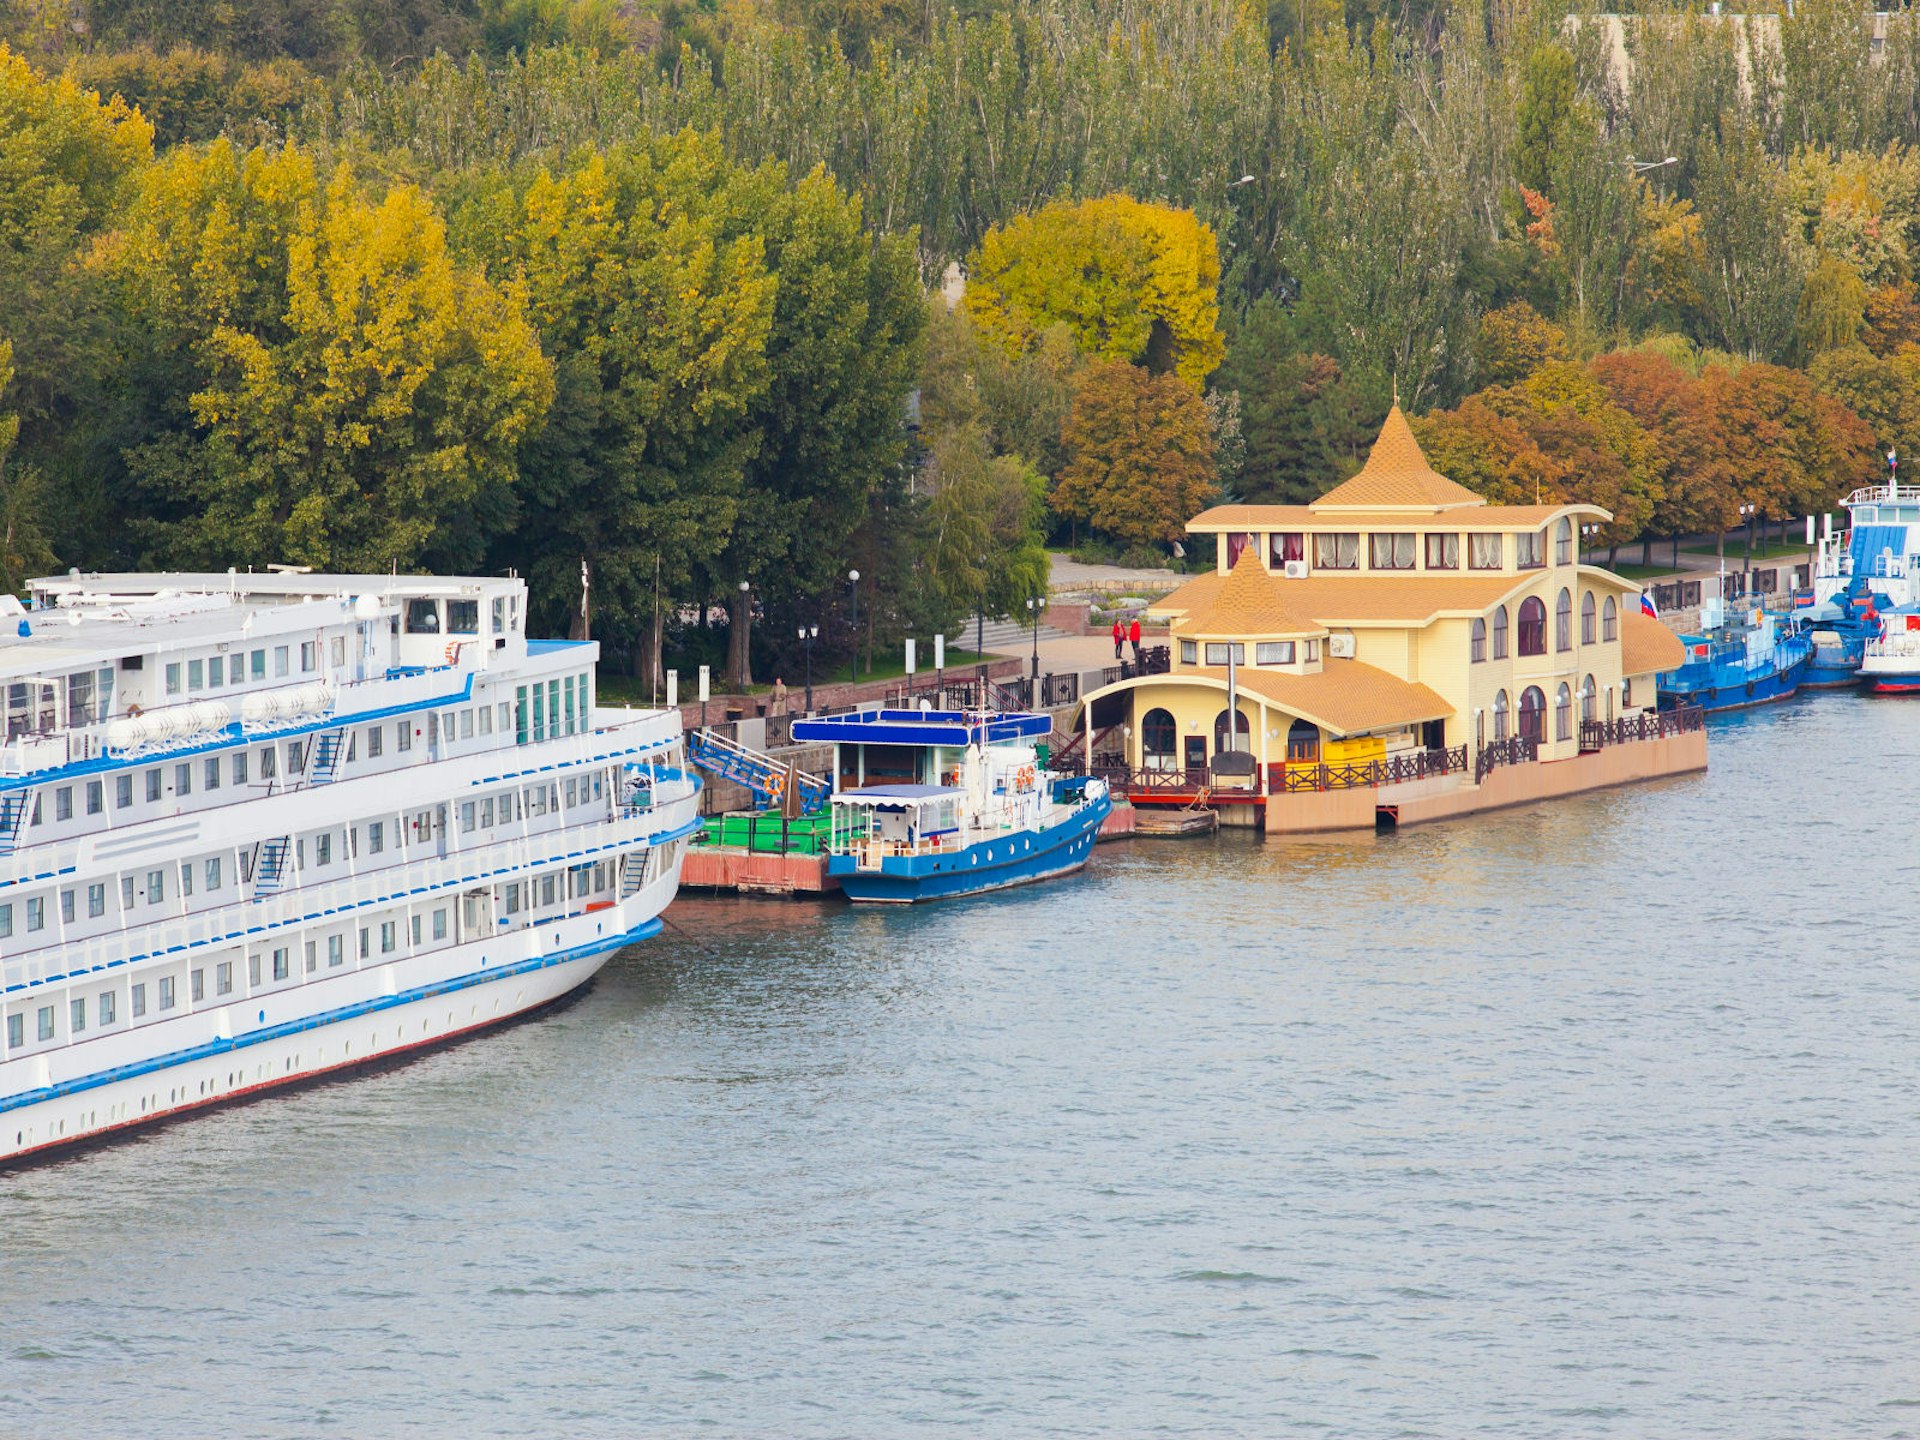 A cruise ship joins smaller boats on the Don River near the port at Rostov-on-Don © Pavel Ilyukhin / Shutterstock